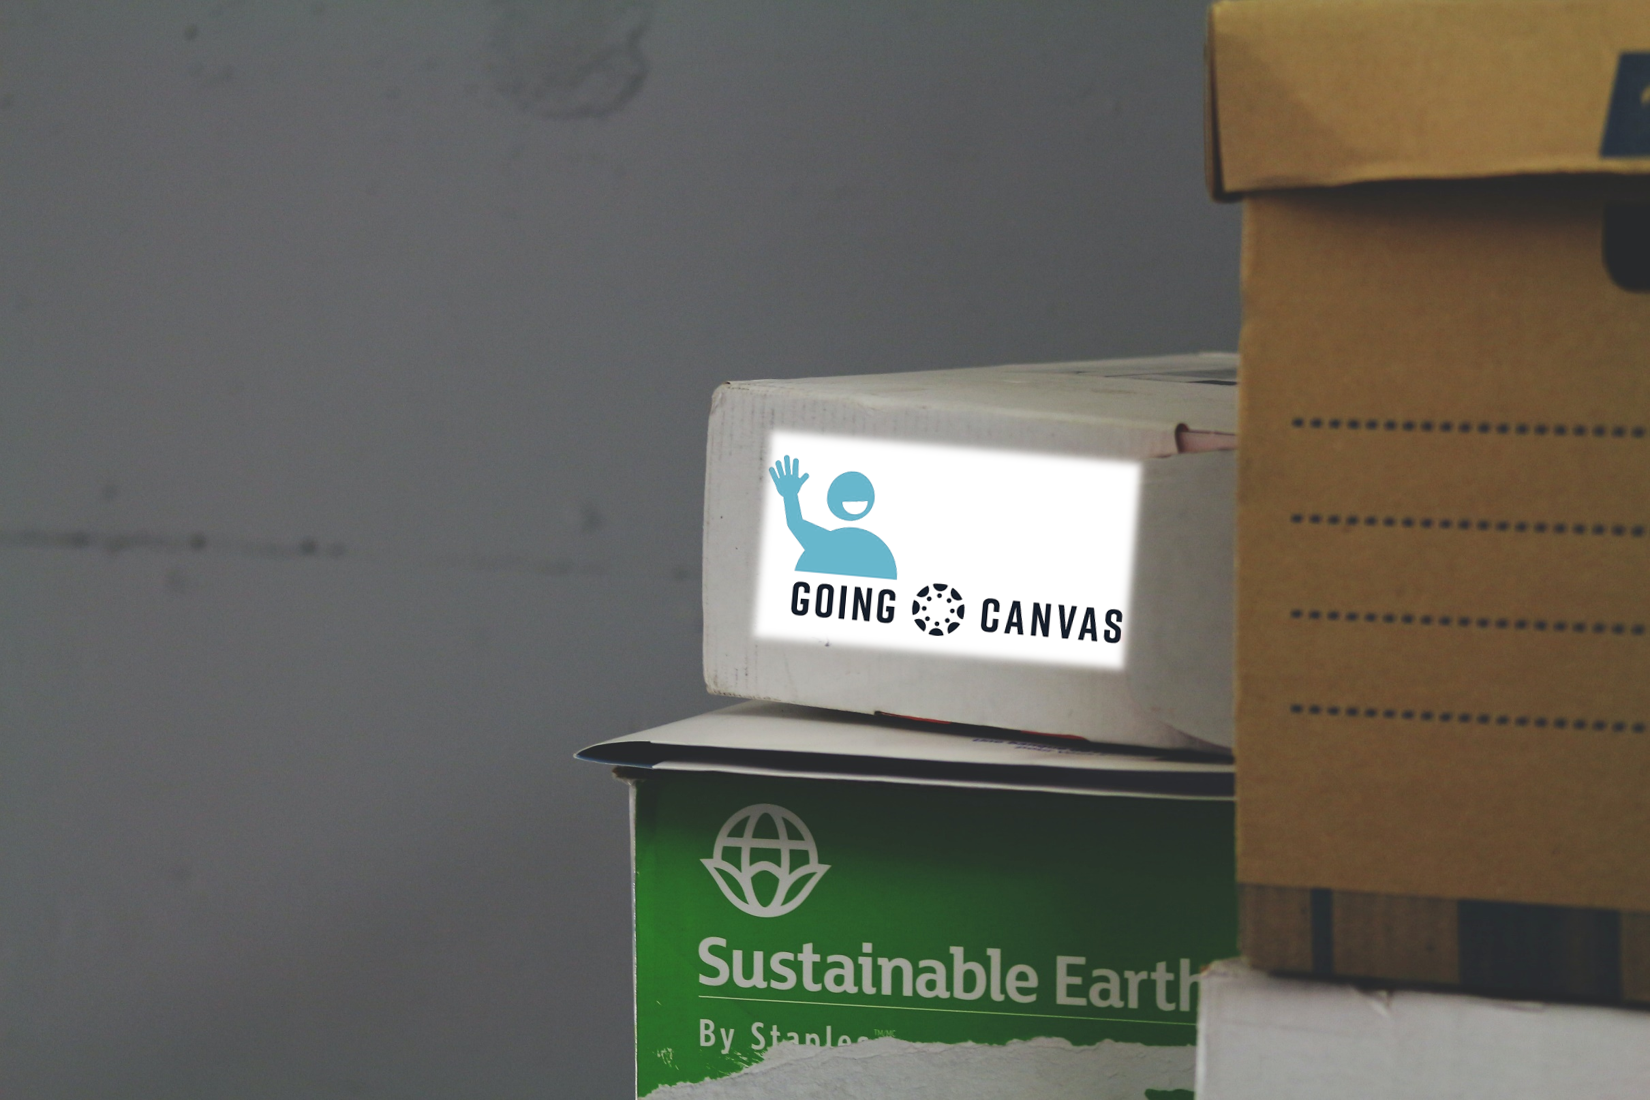 moving boxes with on one of them the going canvas logo